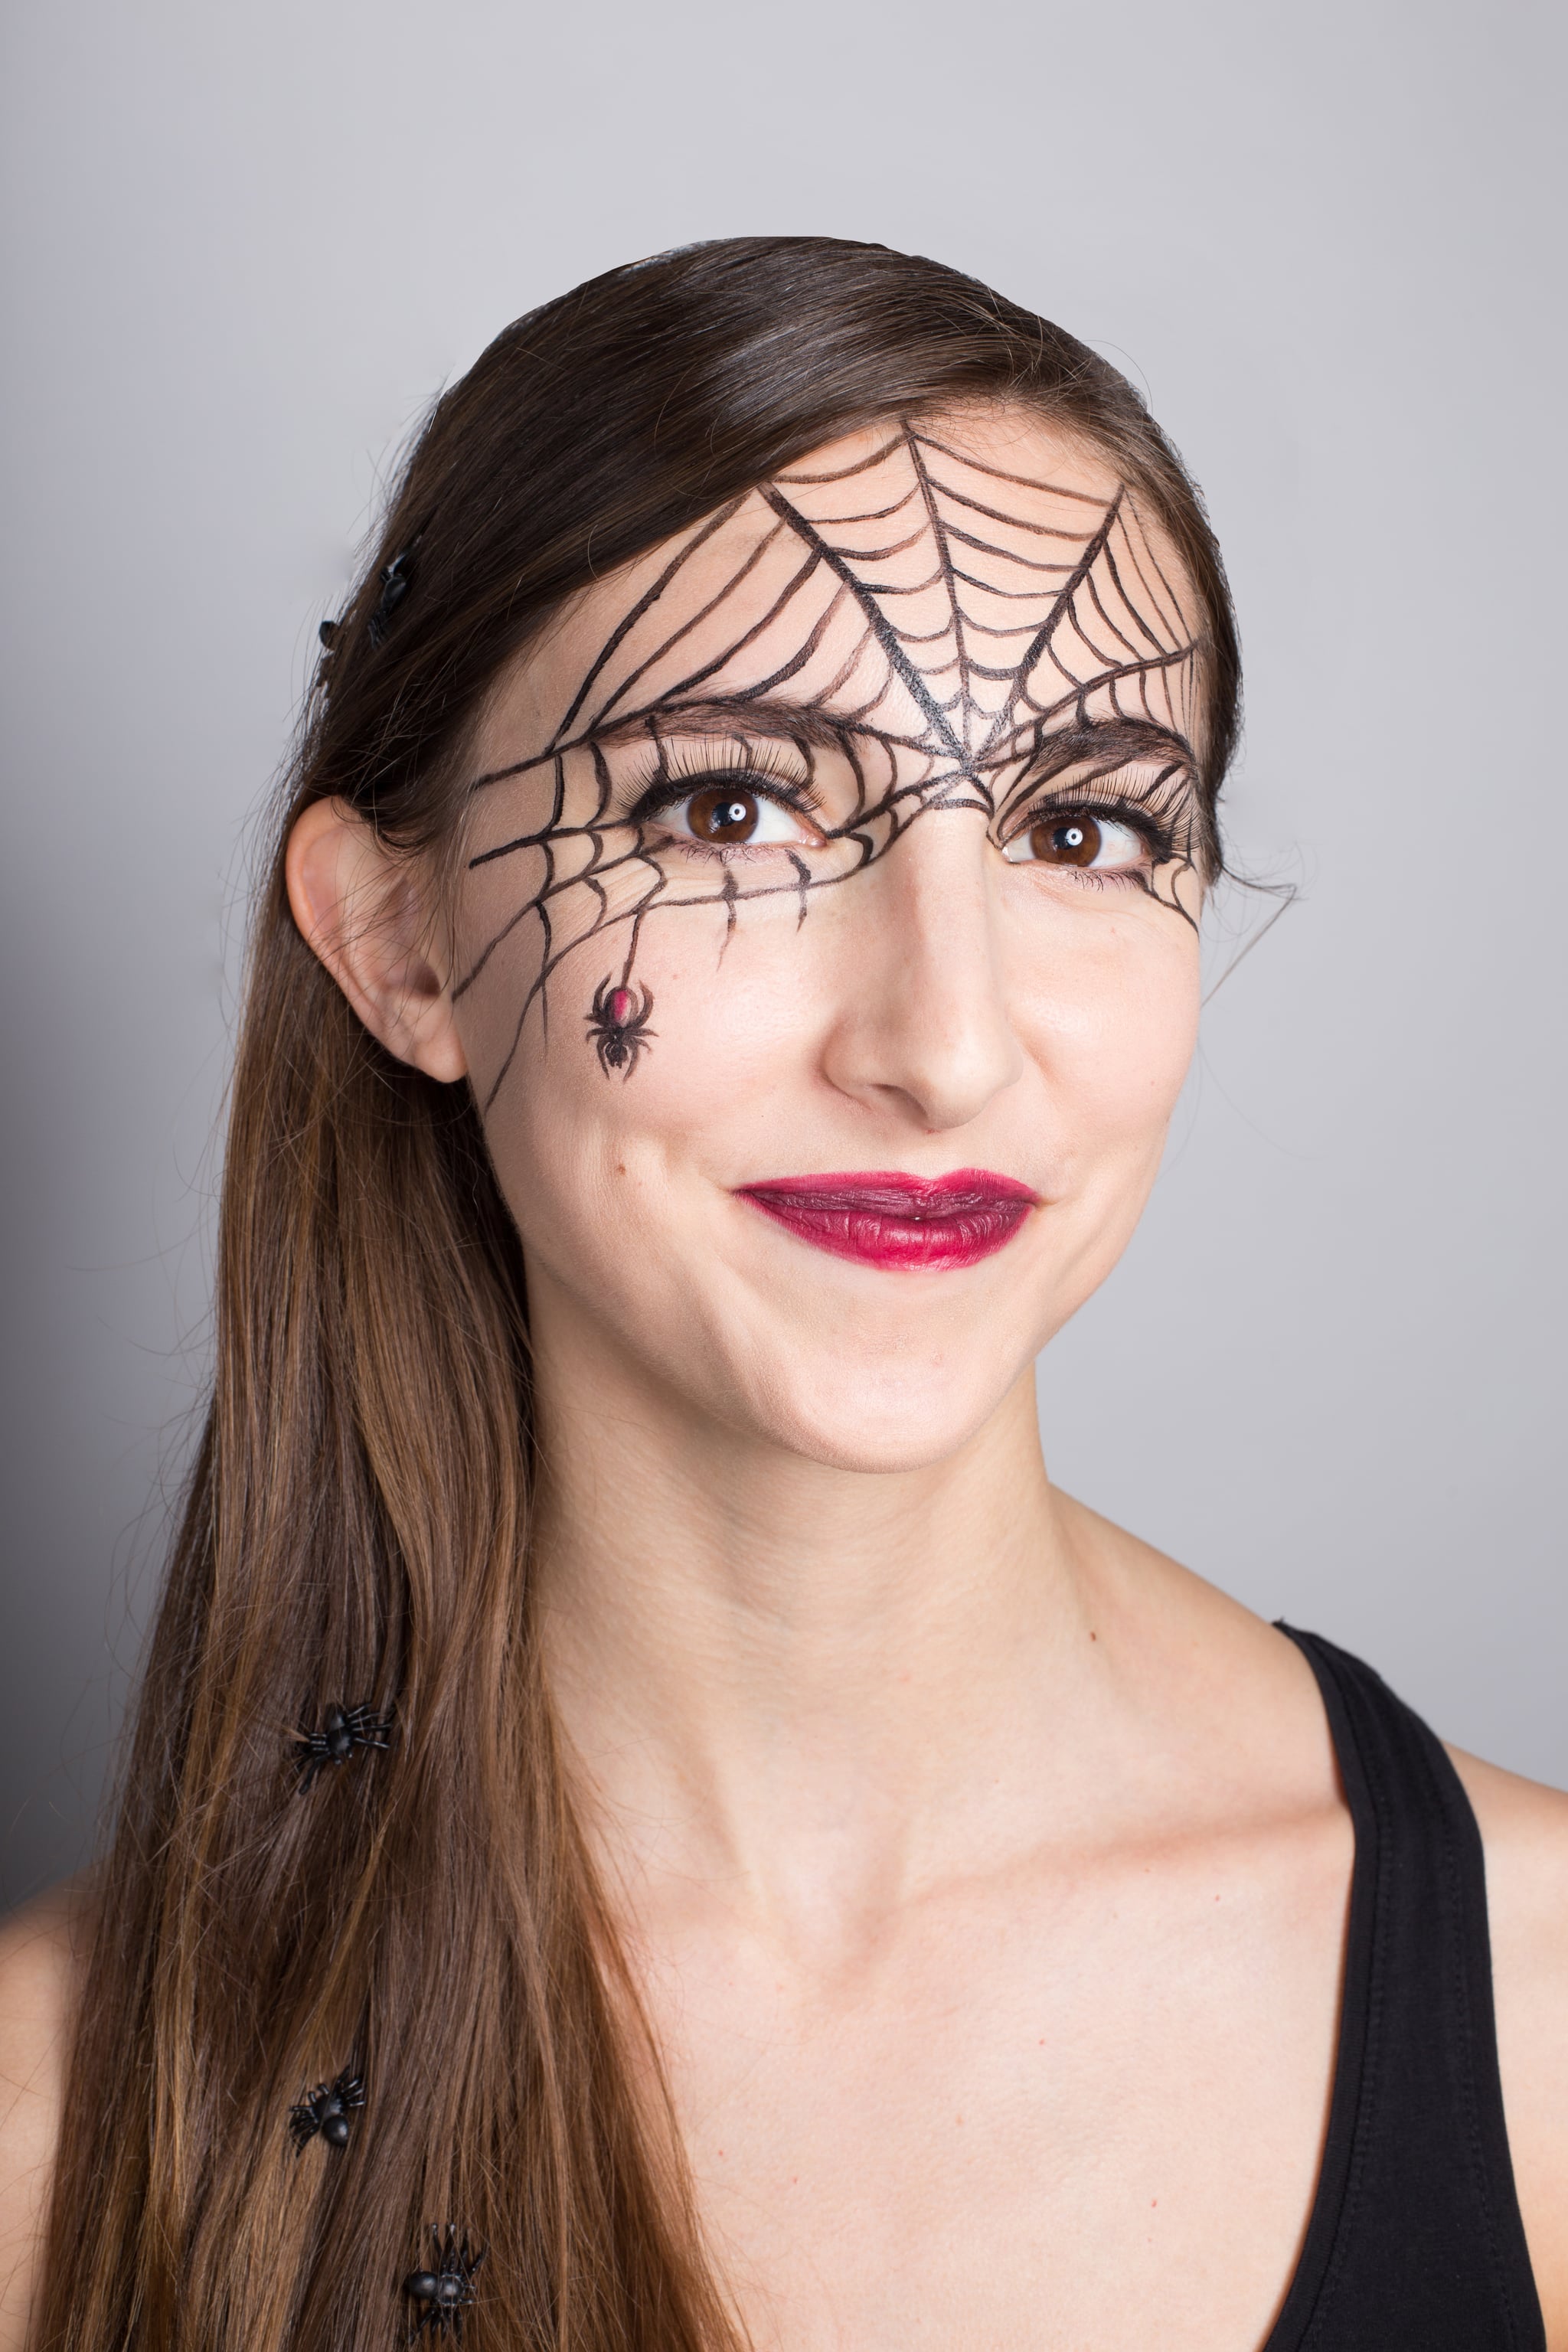 How to Create an Easy Halloween Costume With Makeup You Already